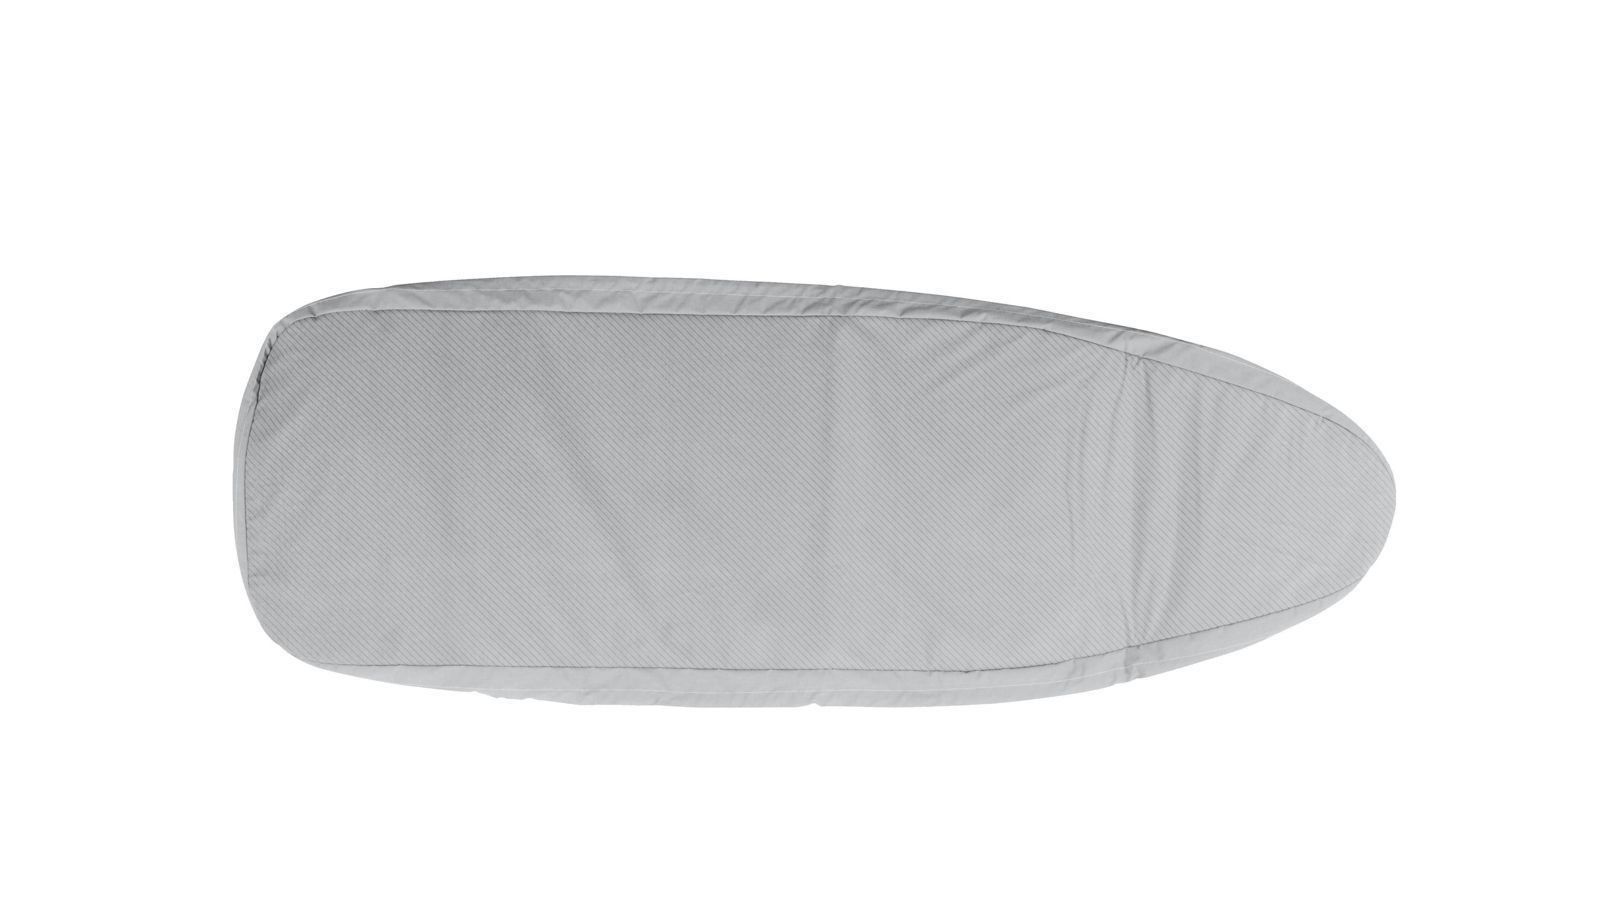 Ironing Board Cover for Bosch Siemens Steam Irons - 00466395 BSH